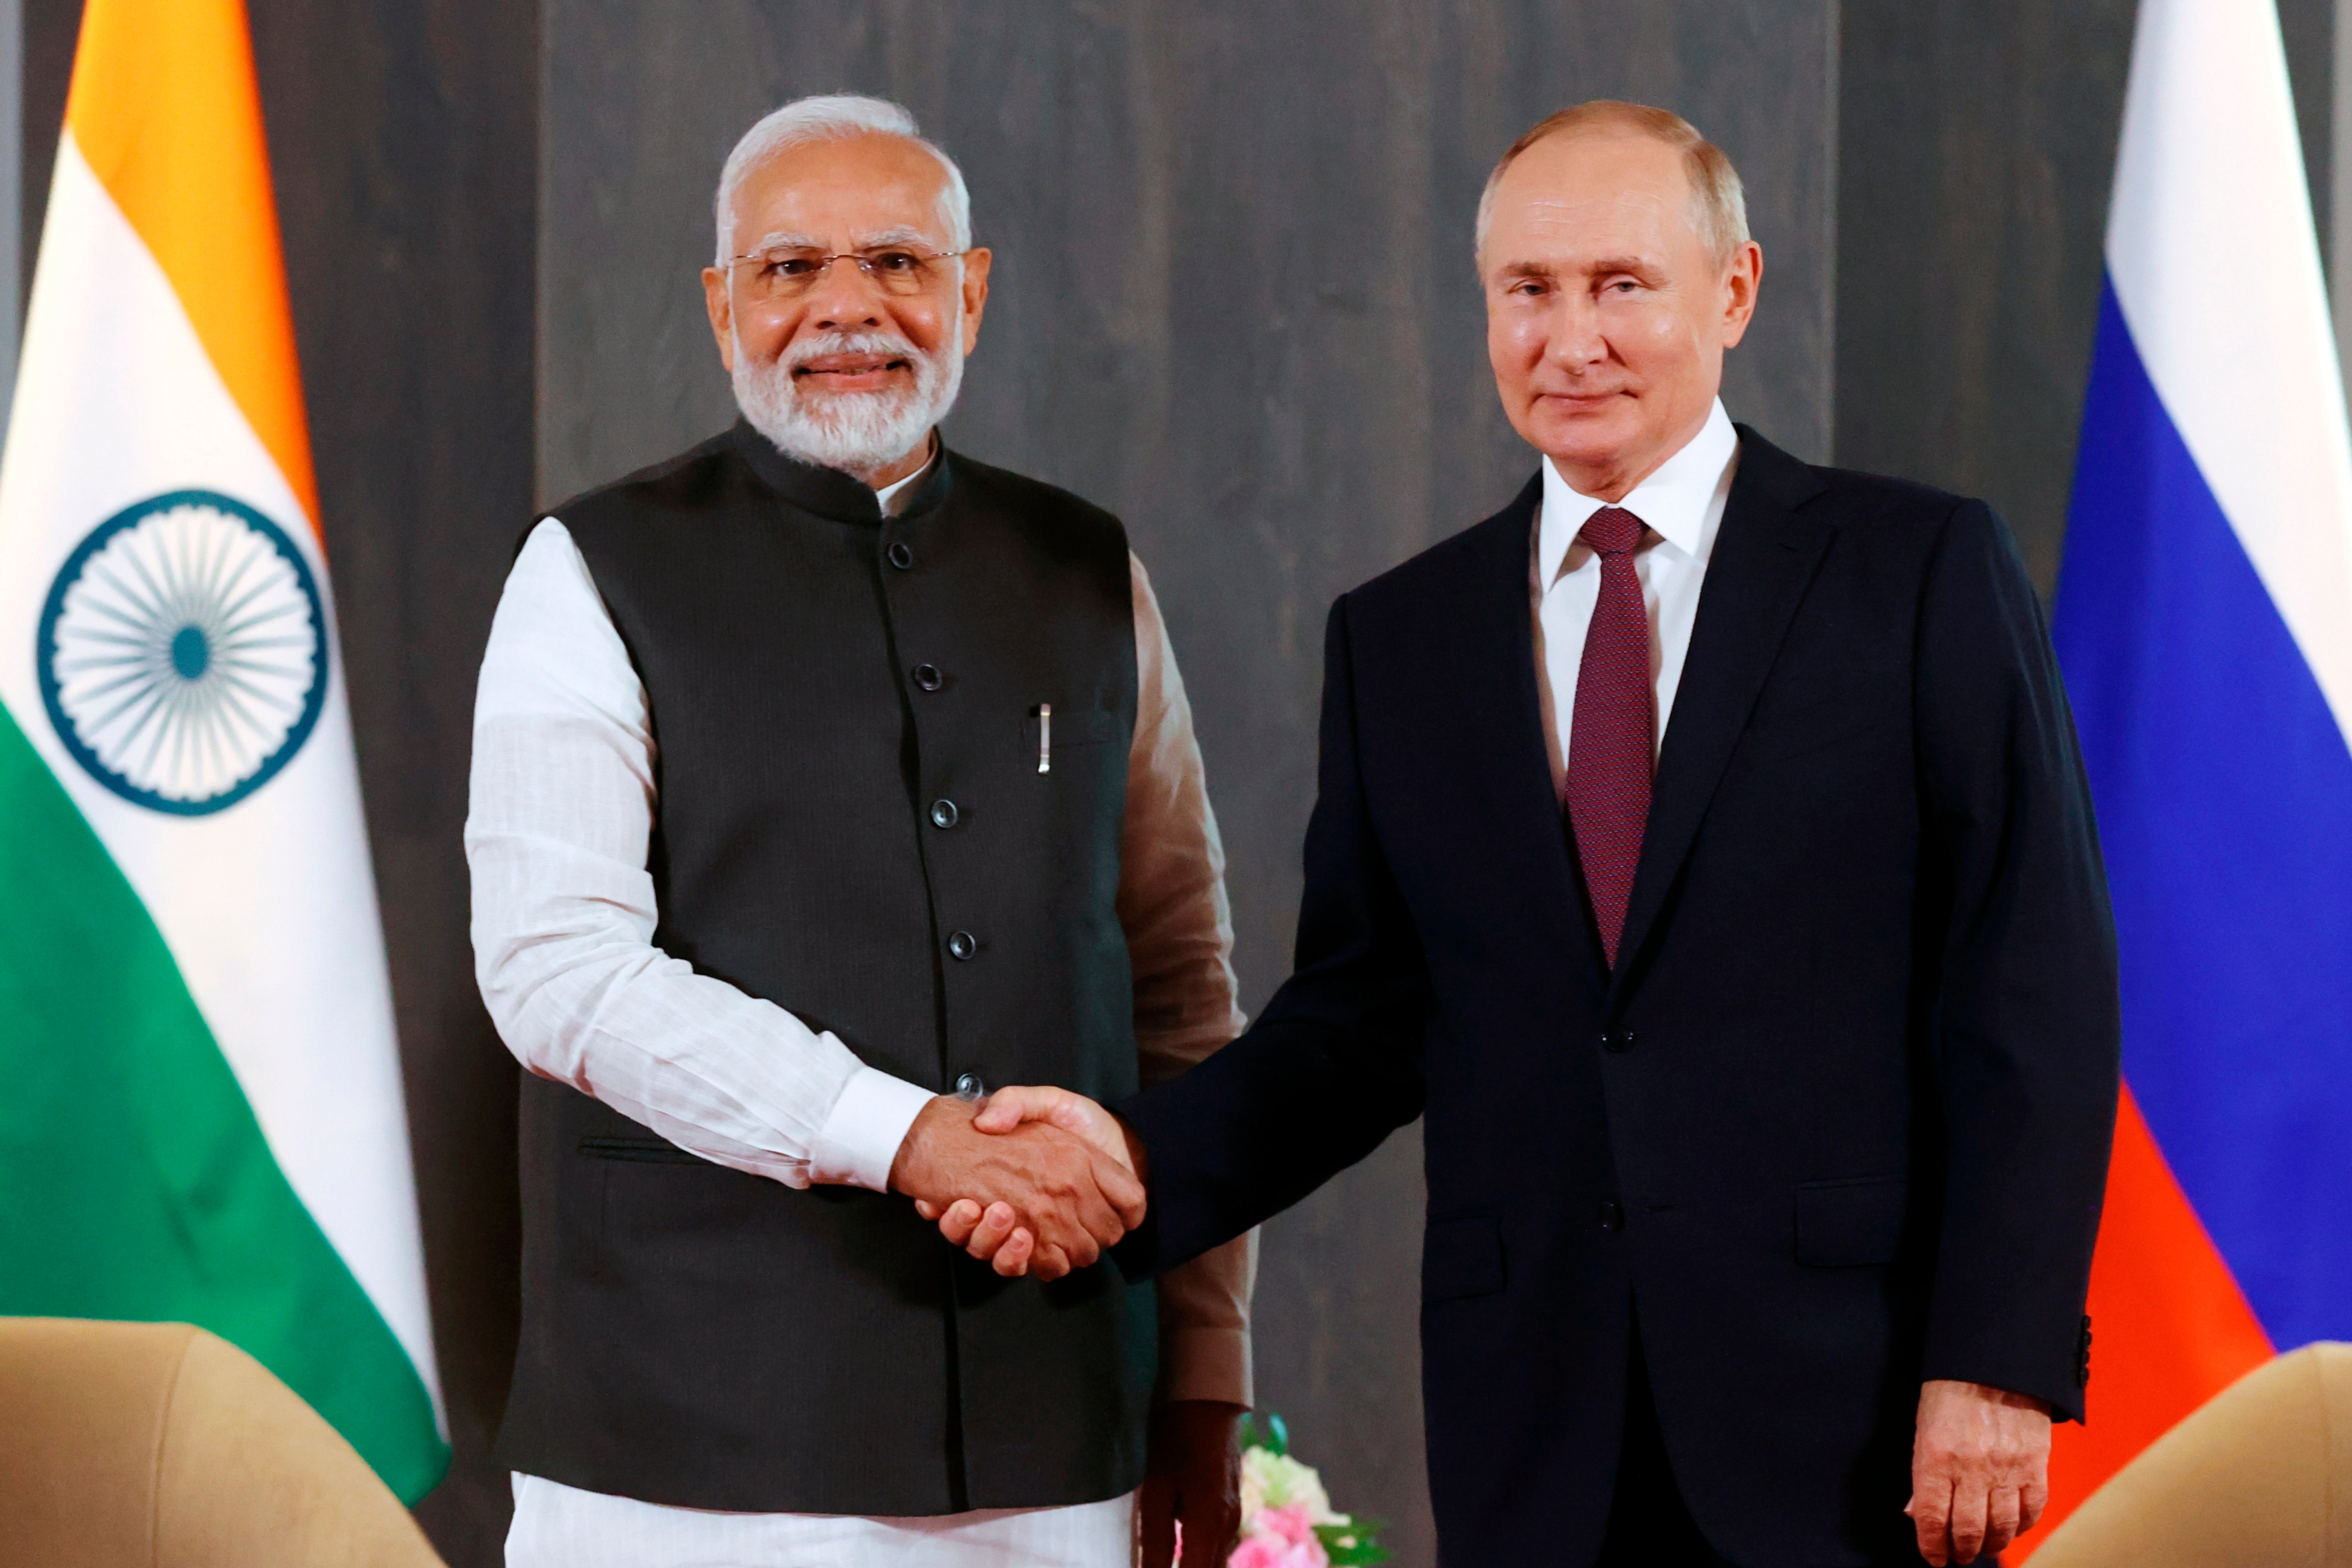 Russian President Vladimir Putin, right, and Indian Prime Minister Narendra Modi pose for a photo shaking hands prior to their talks on the sidelines of the Shanghai Cooperation Organisation